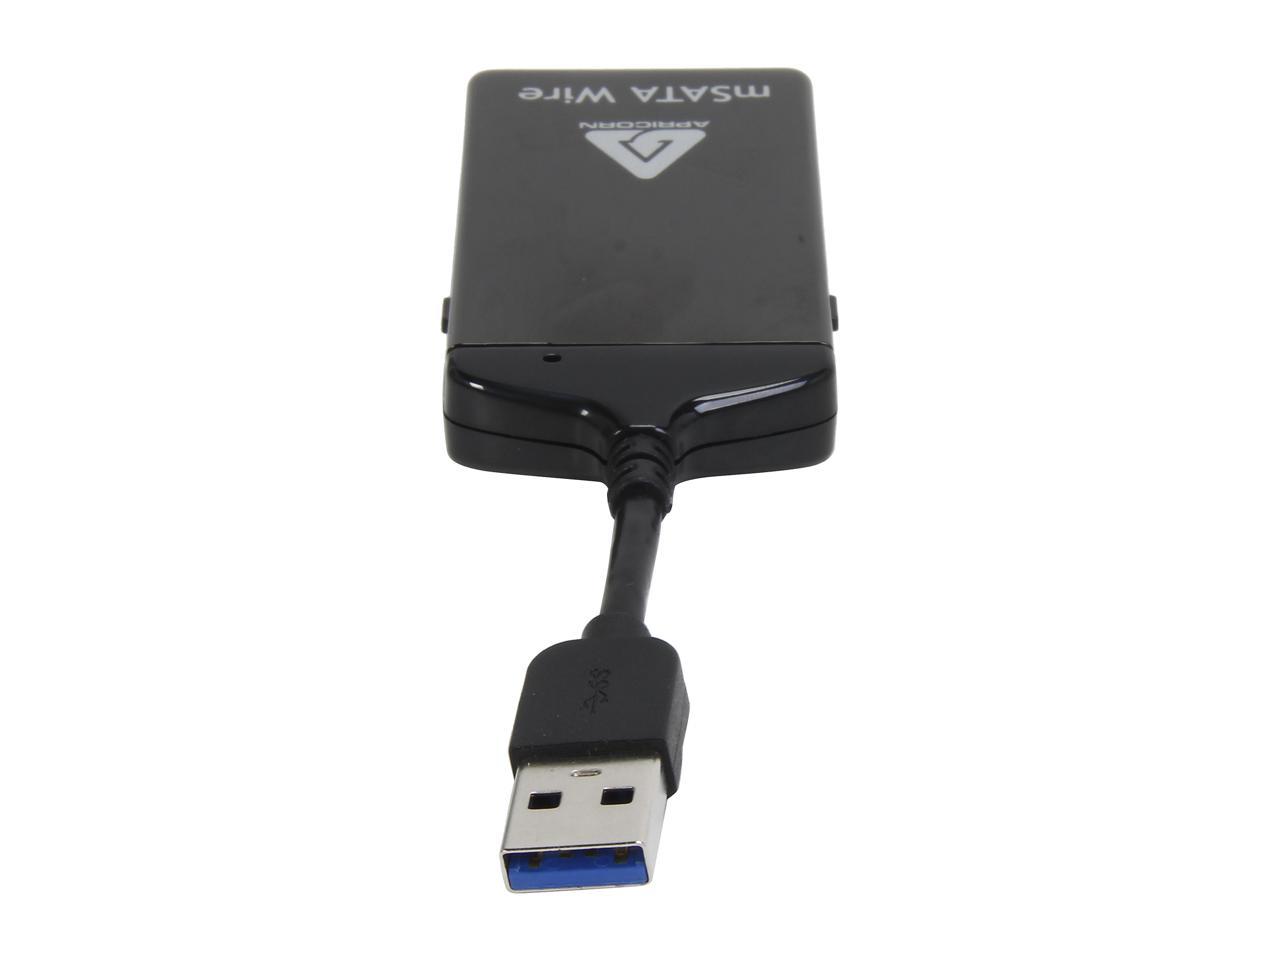 apricorn sata wire notebook hard drive upgrade kit with usb 3.0 connection asw-u